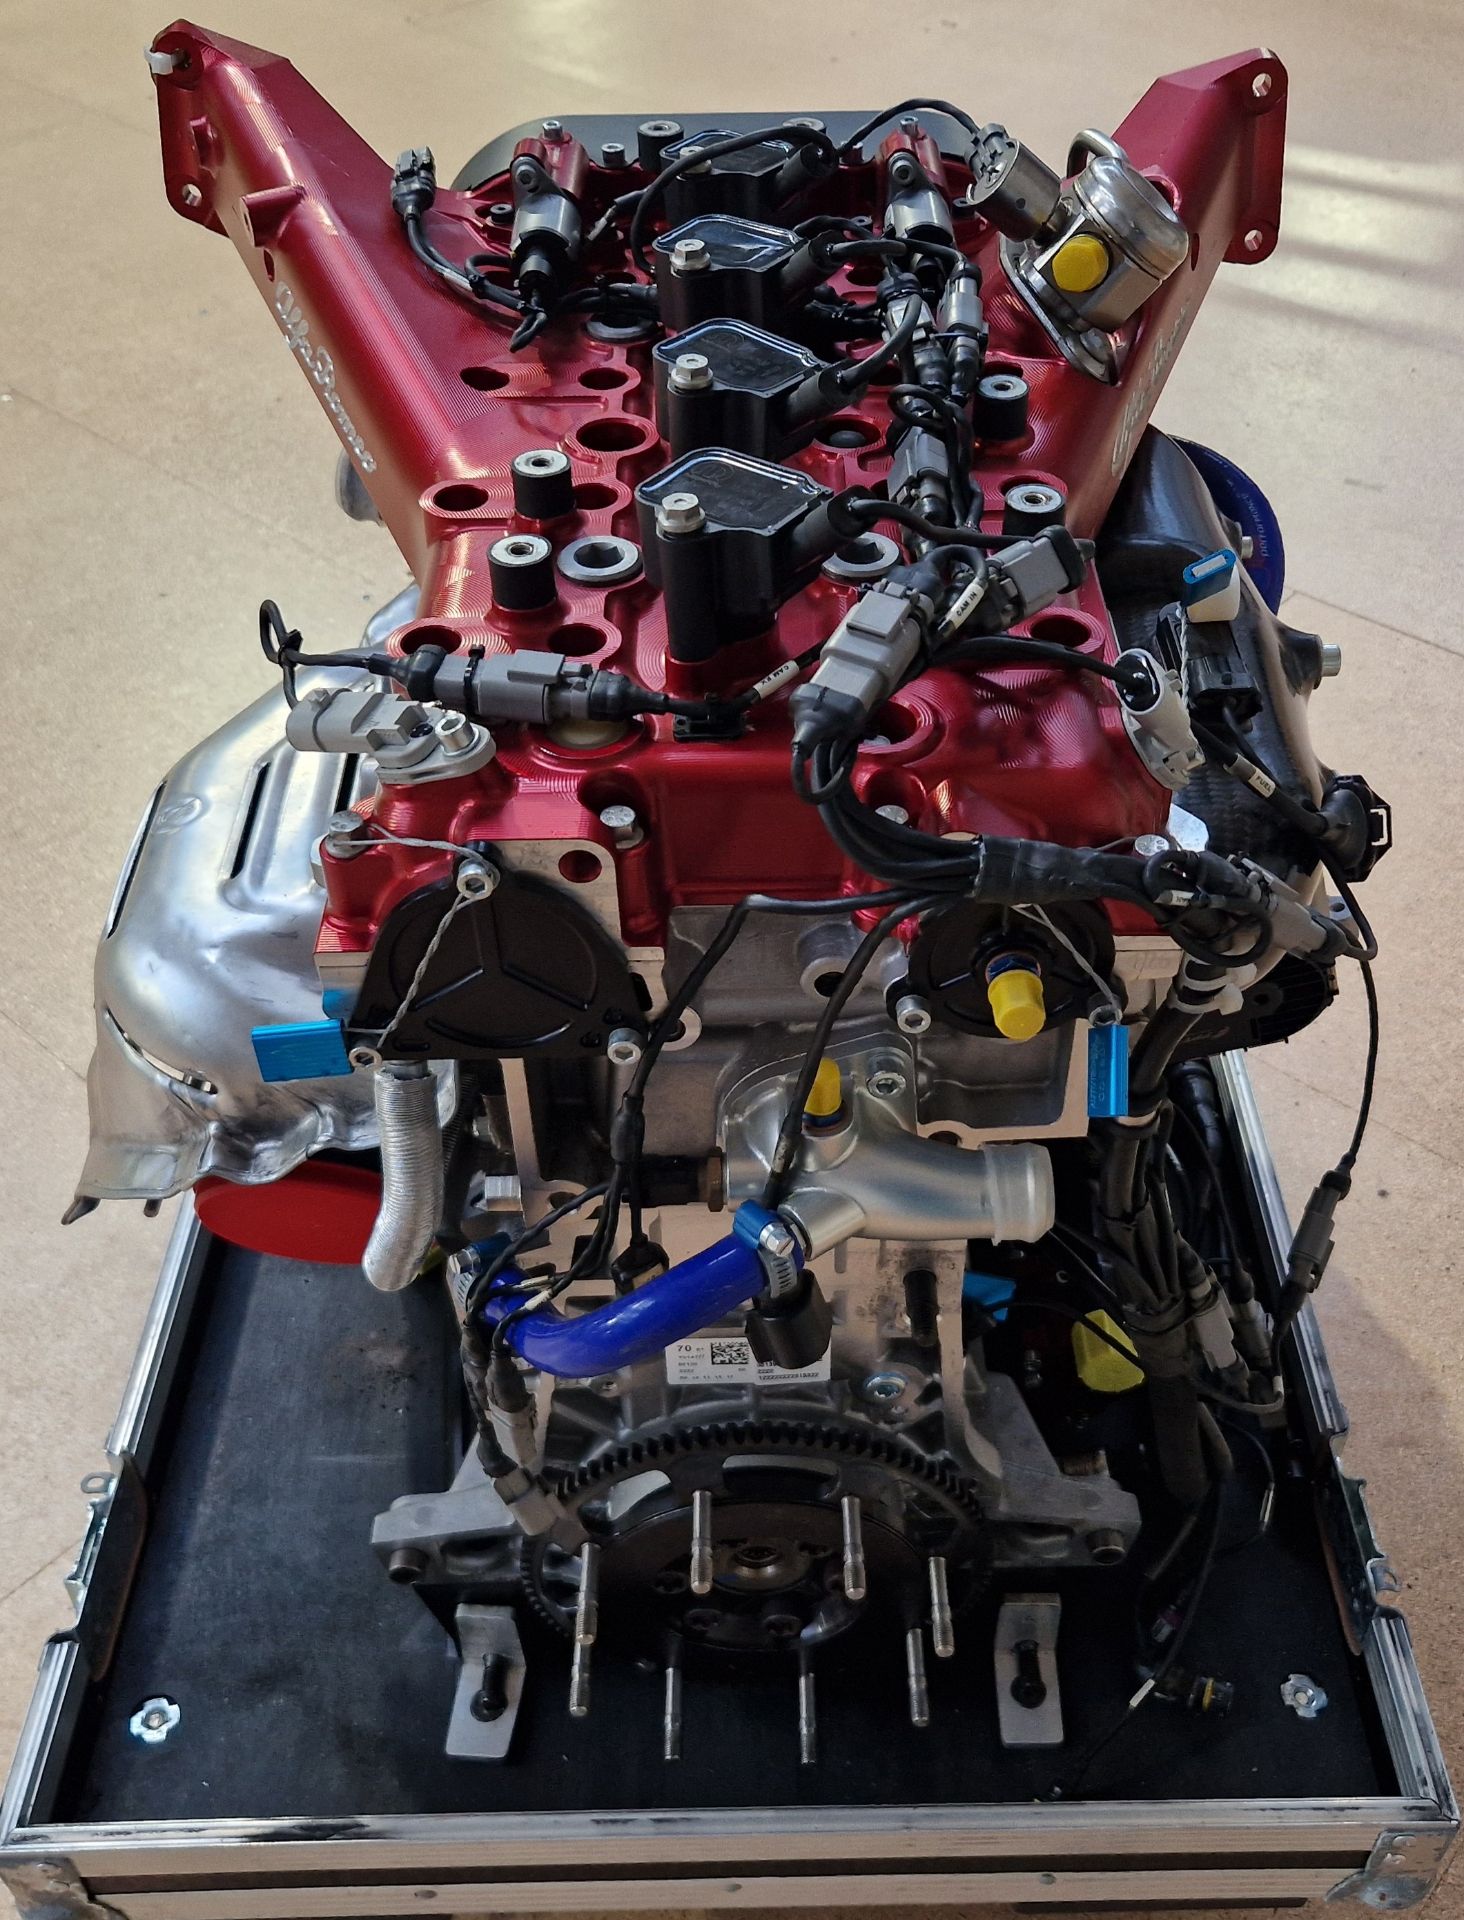 One ALPHA ROMEO 1.75L Twin Overhead Cam Turbocharged Race Car Engine, No. 164 in a Castor mounted - Image 3 of 6